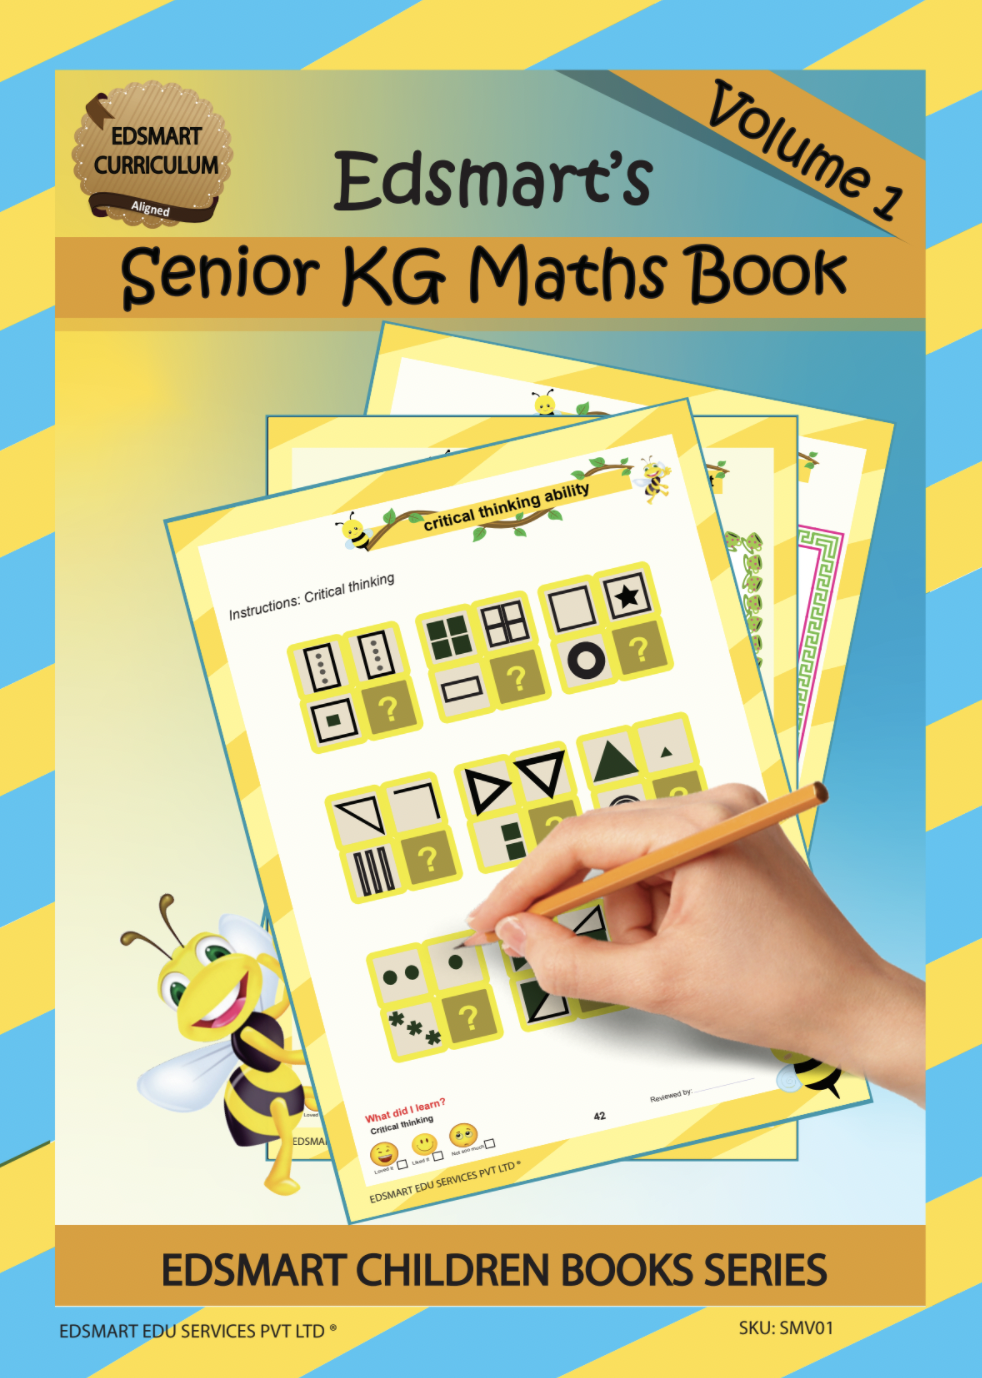 Senior KG Maths and Science Book combo - 3 books